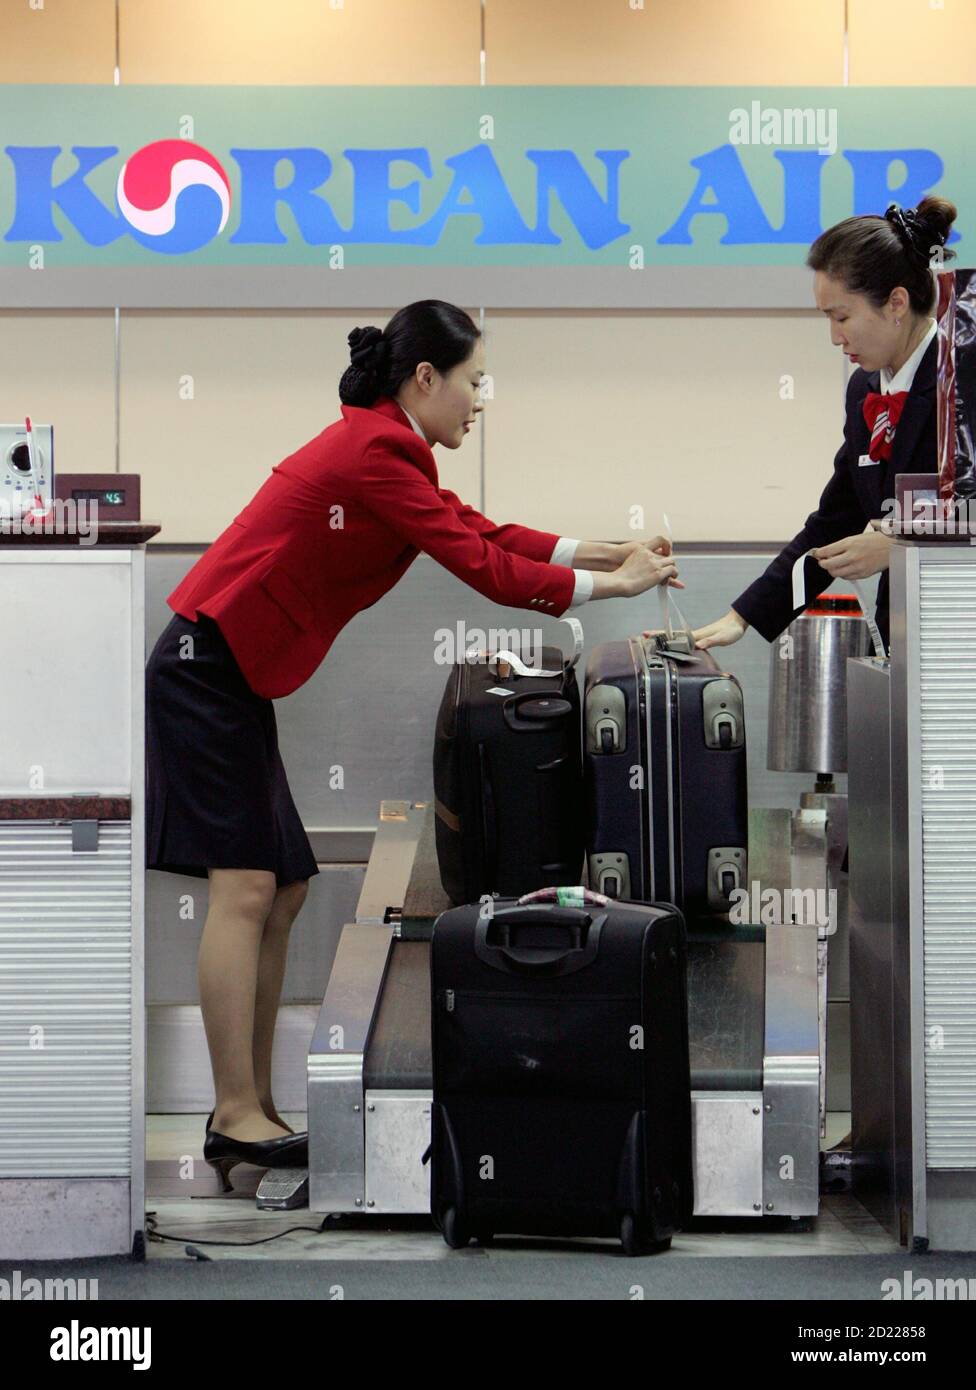 Korean Air check-in staffs tag passengers' luggage at Seoul's Kimpo airport  December 7, 2005. Unionised pilots at Korean Air Co. plan to strike from  Thursday after failing to reach a pay agreement